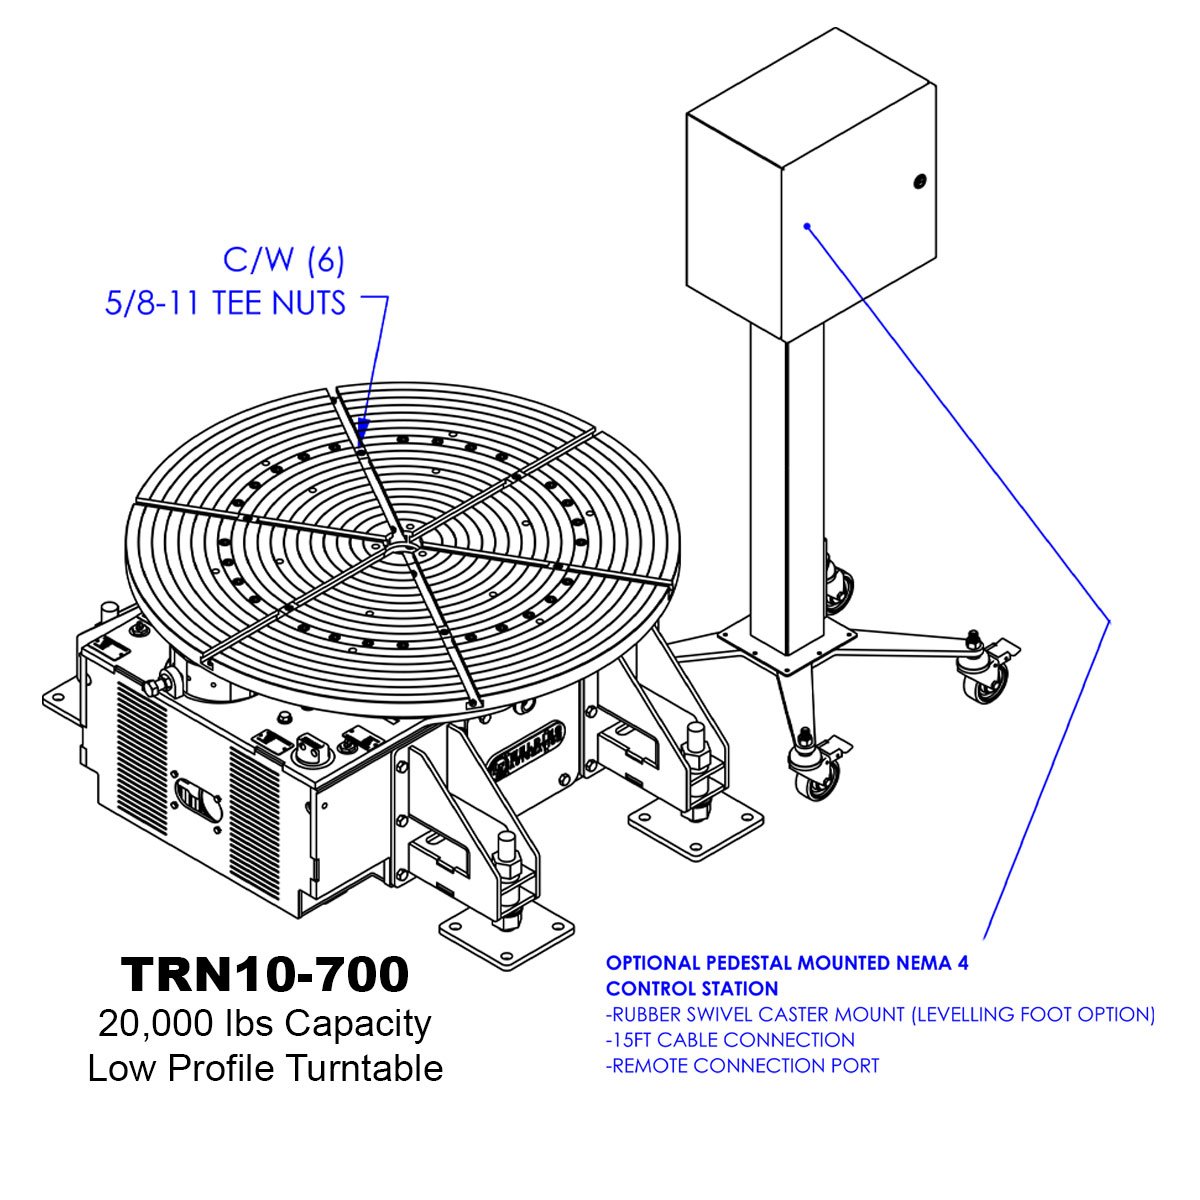 04-20000lb-Low-Profile-Turntable